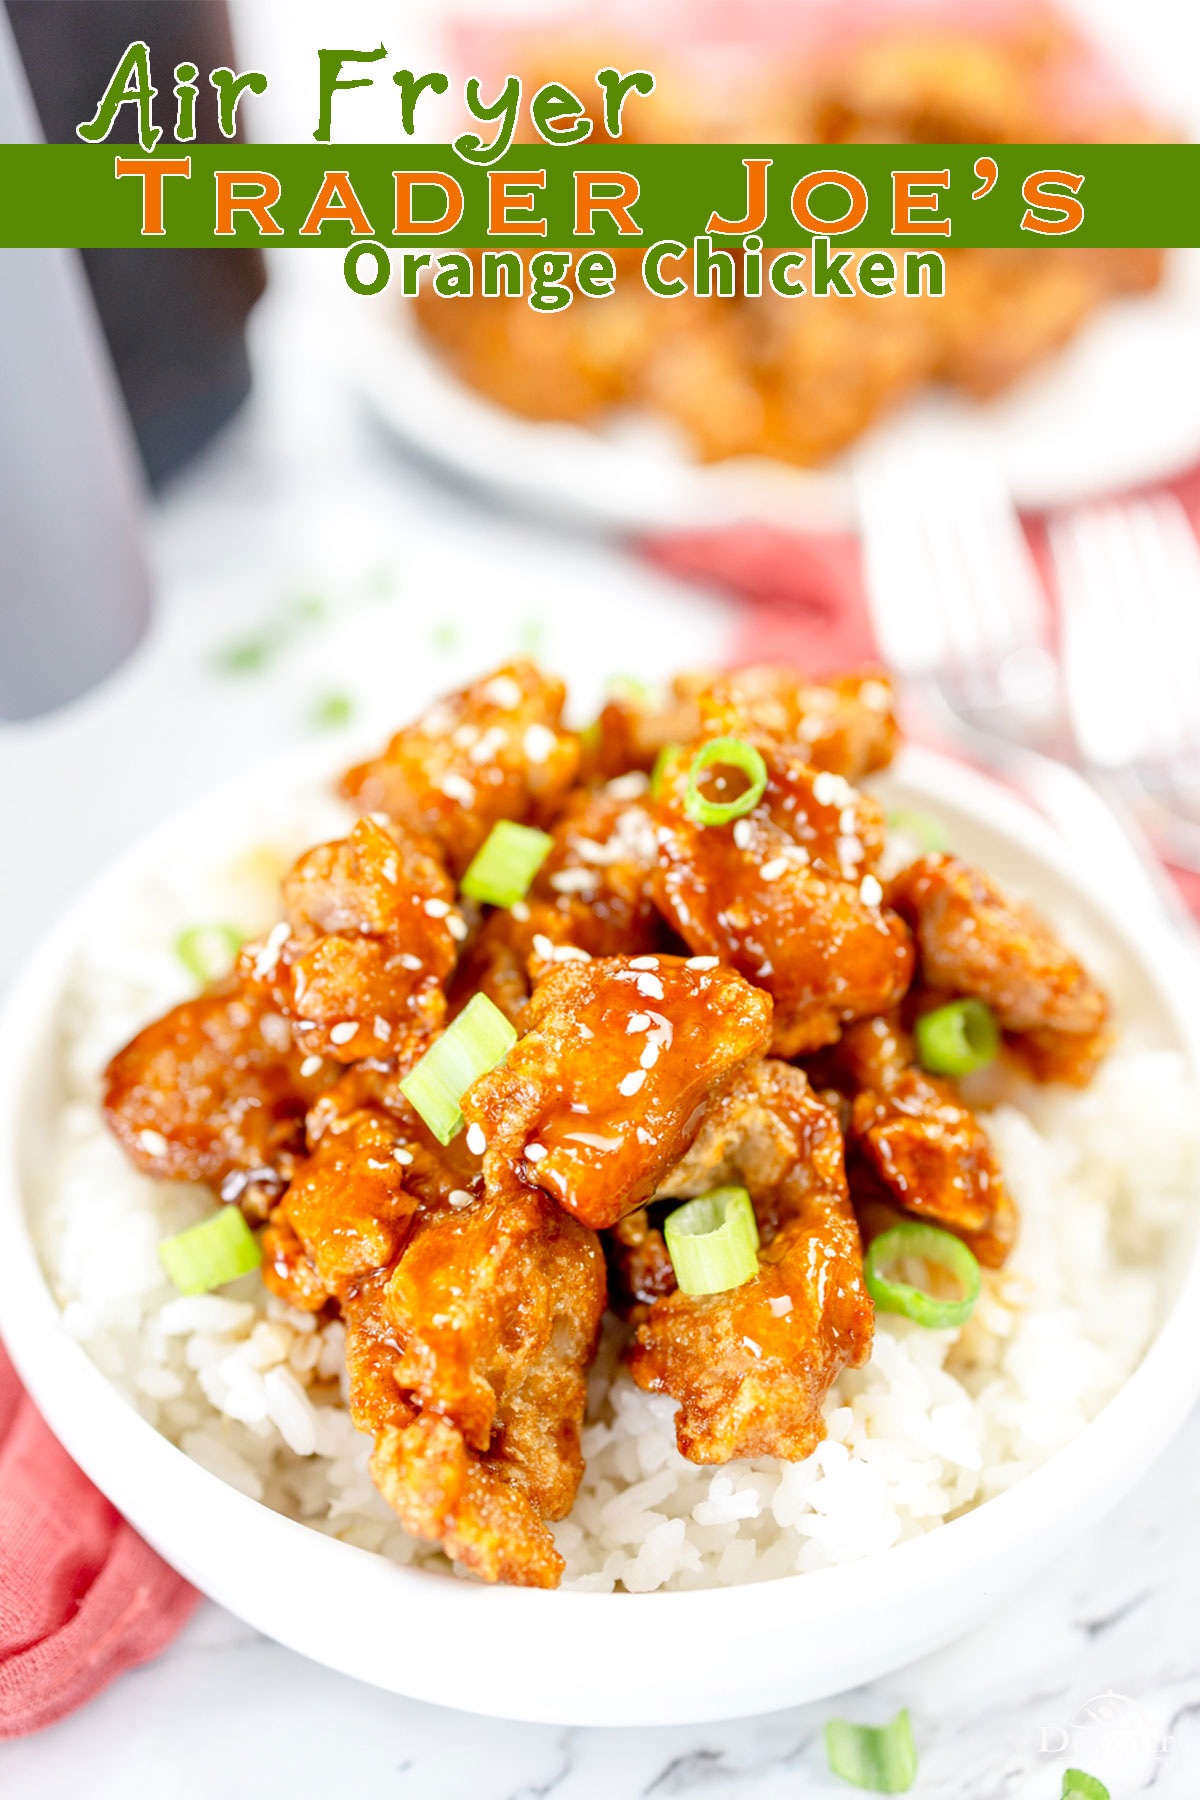 This Trader Joe's Orange Chicken Air Fryer recipe gives you sublime flavors with unbeatable crunch in just 15 minutes! It's the perfect solution to busy weeknight meal situations for the whole family!